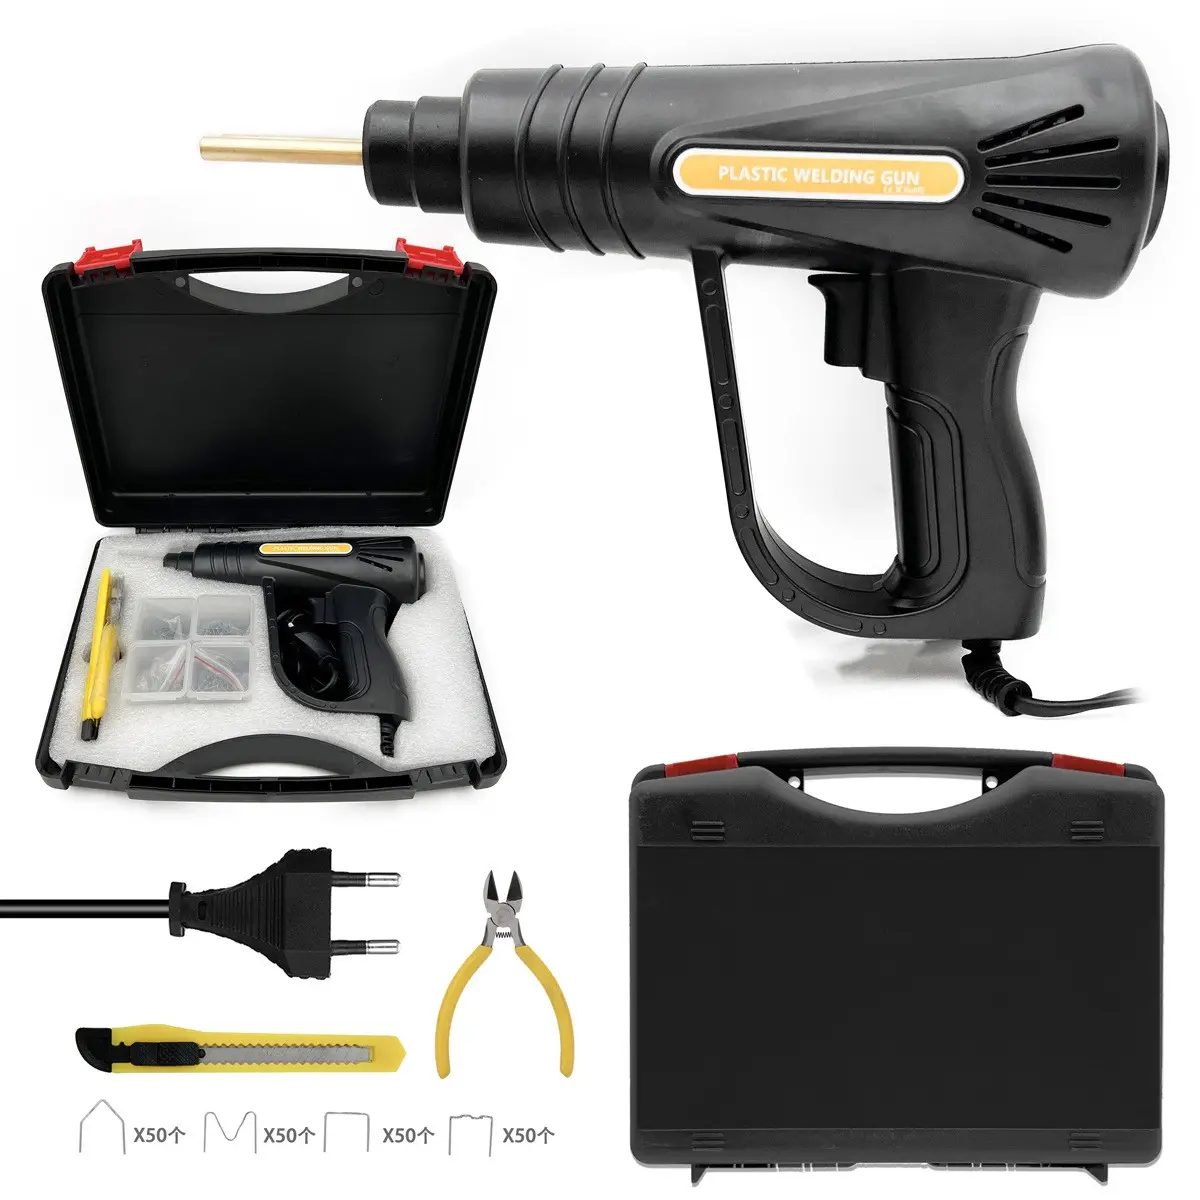 Professional plastic welding gun set with knife and pliers Car used Plastic stapler